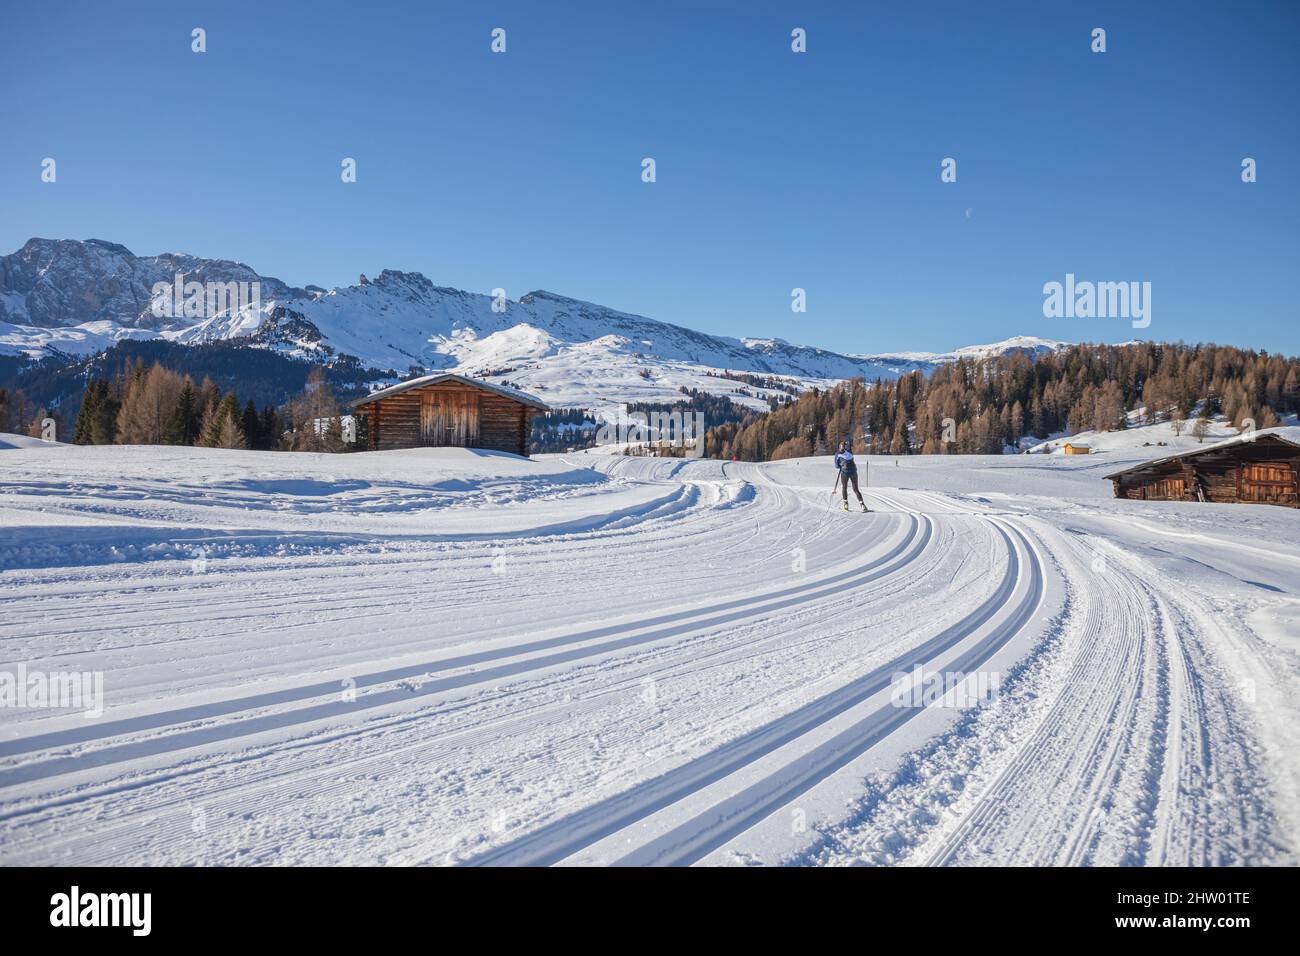 The skiing area Groeden with Seiser Alm, St. Ulrich, St. Christina and Wolkenstein areas in Dolomite Alps, South Tyrol, Italy Stock Photo